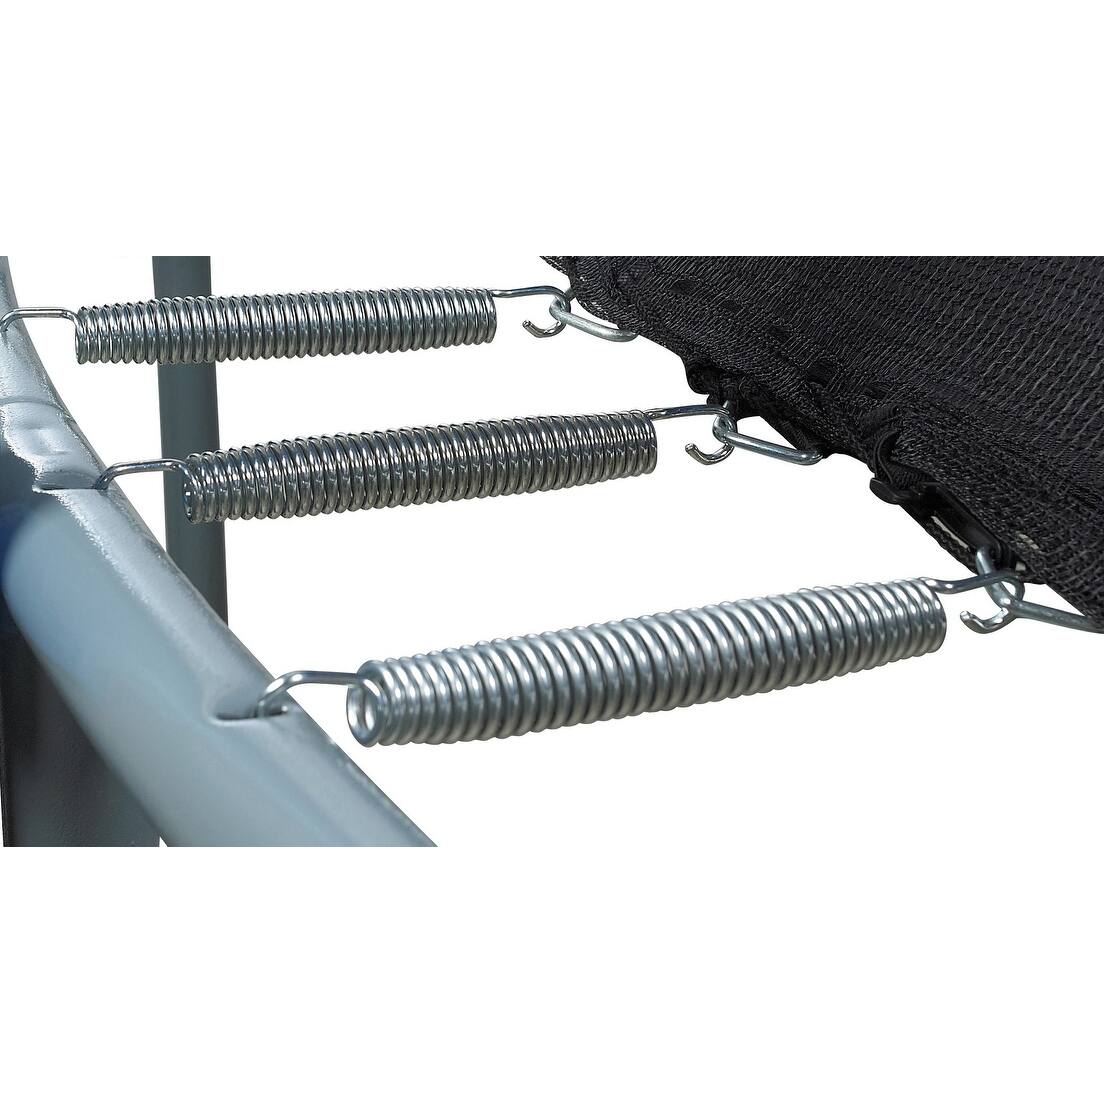 Machrus Upper Bounce Premium Quality Heavy-Duty Galvanized Stainless Steel Trampoline Springs - 5 Inch - Set of 15